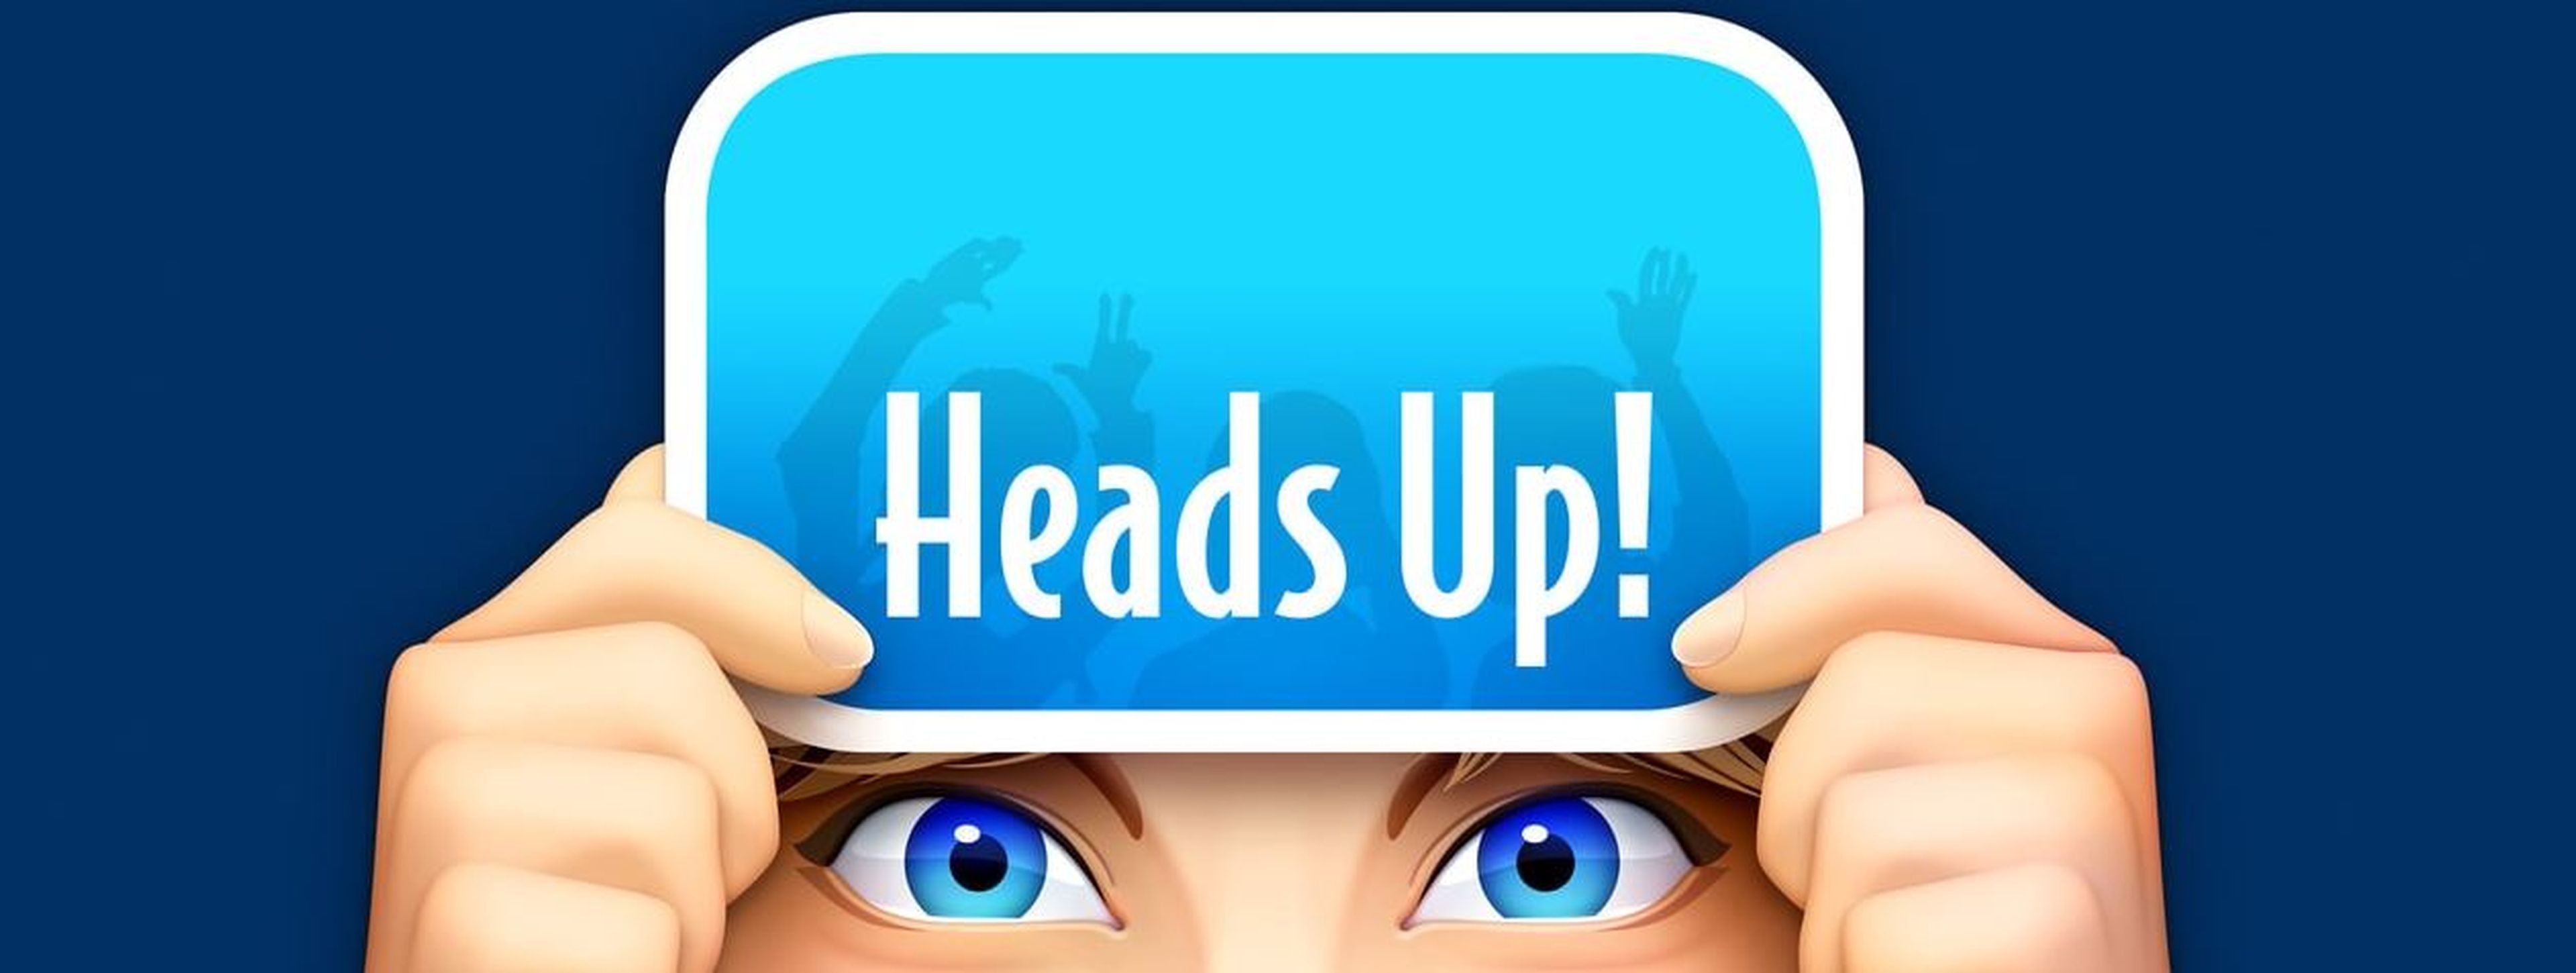 Juego Heads Up!